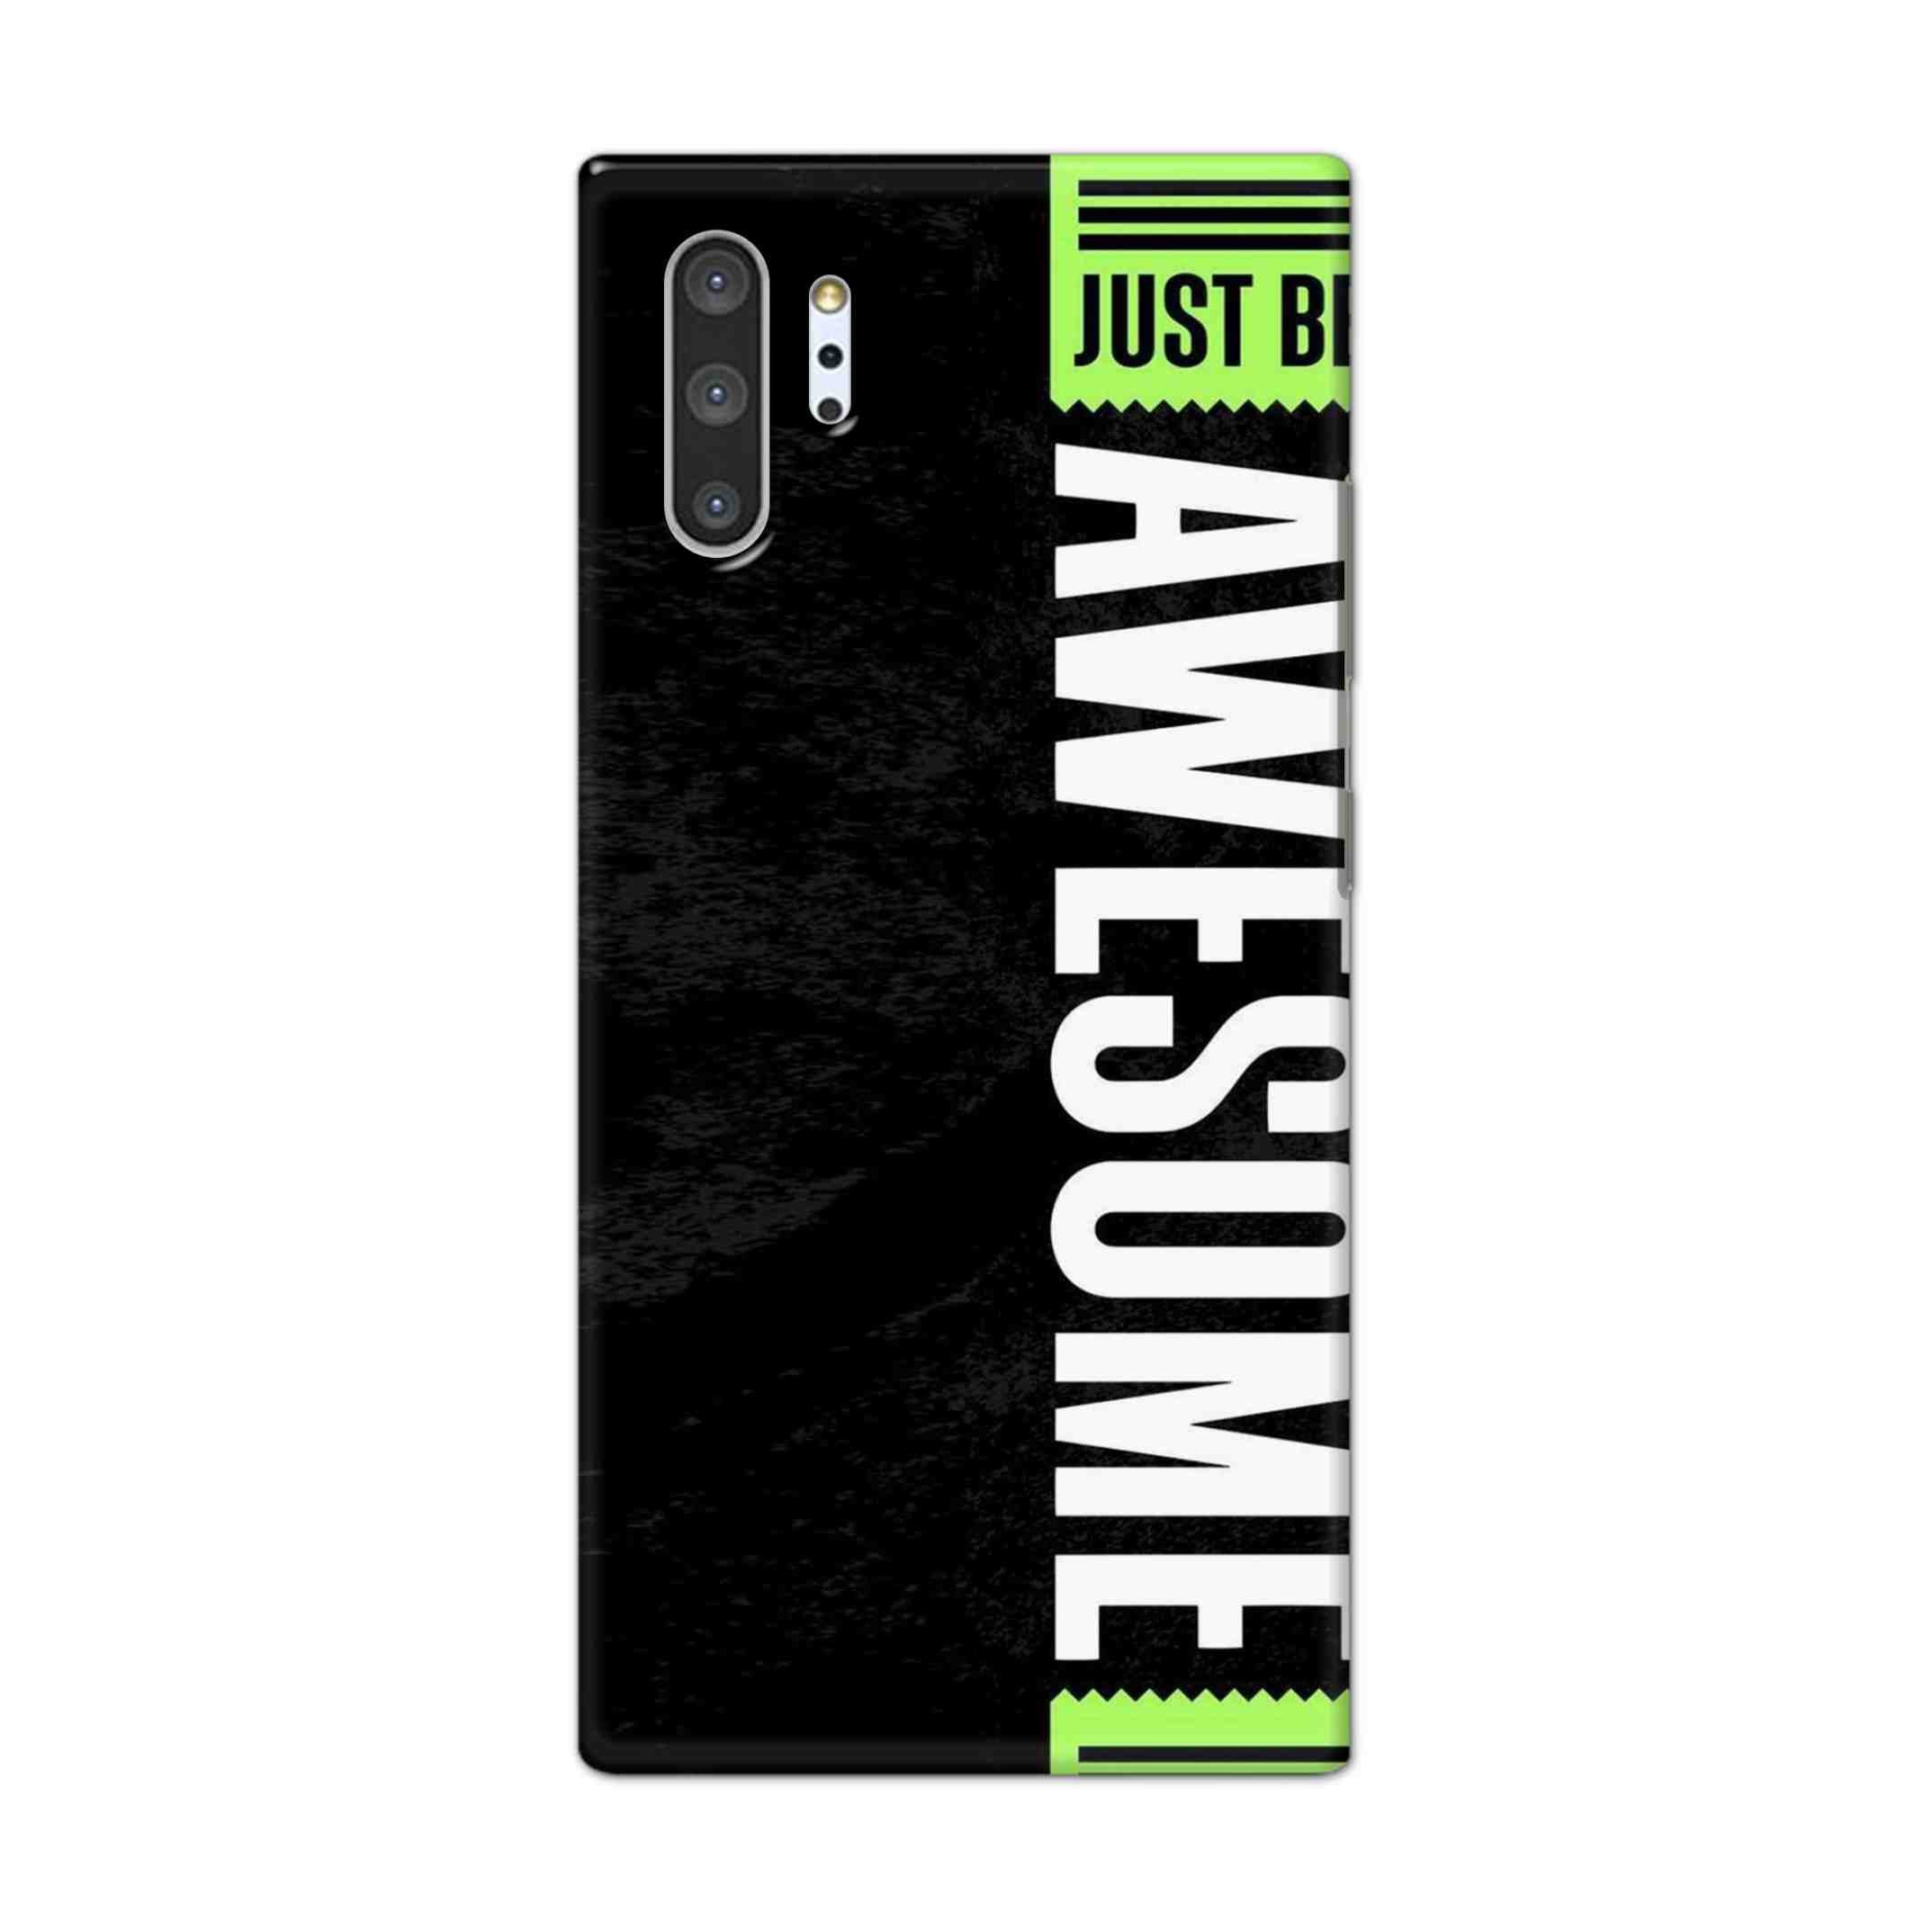 Buy Awesome Street Hard Back Mobile Phone Case Cover For Samsung Galaxy Note 10 Pro Online